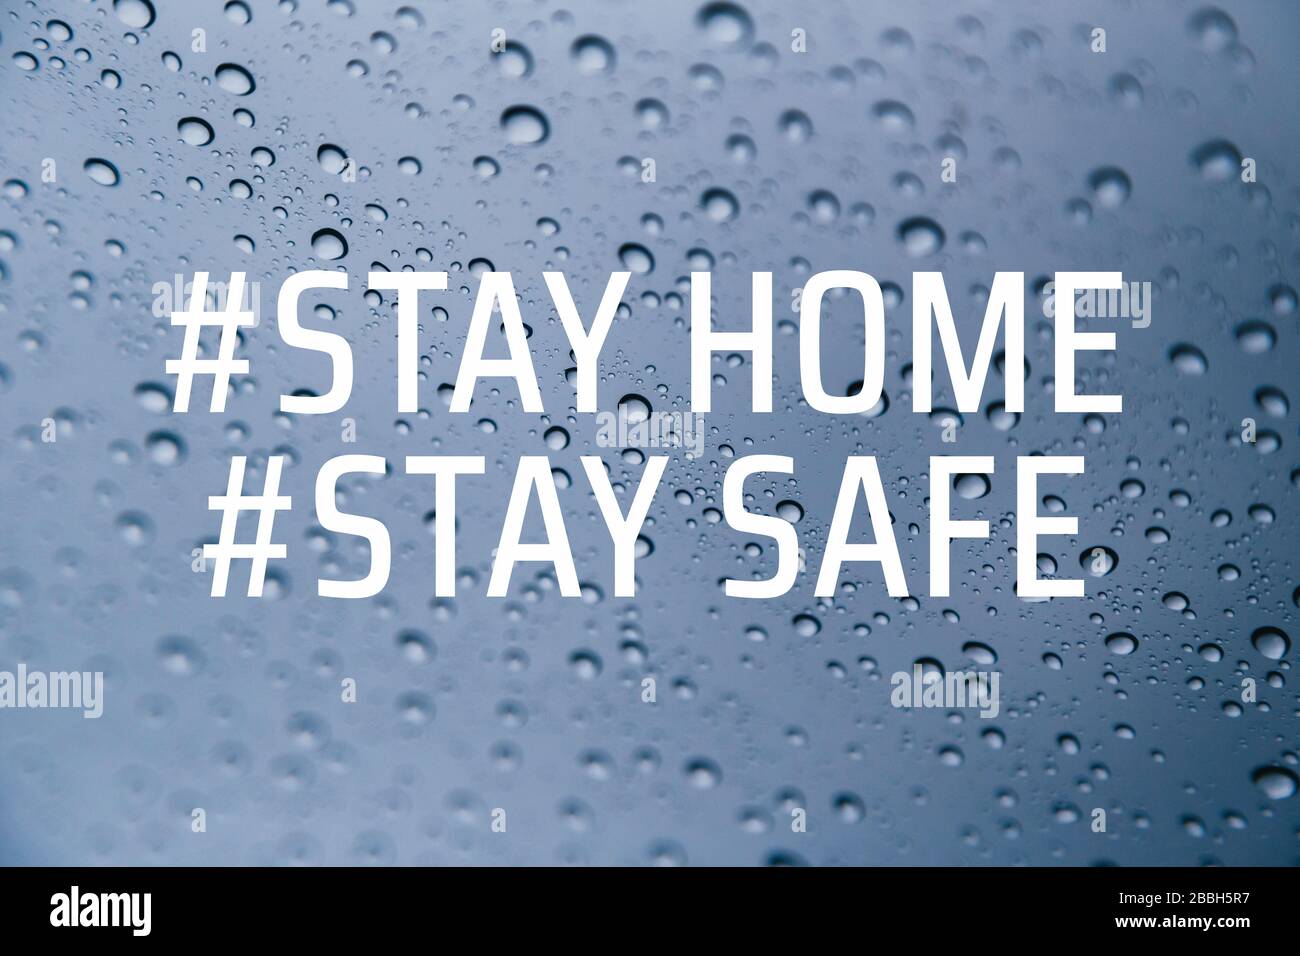 Stay at home social media campaign for coronavirus prevention. Stay home stay safe concept. Close up of rain drops on the window at background Stock Photo